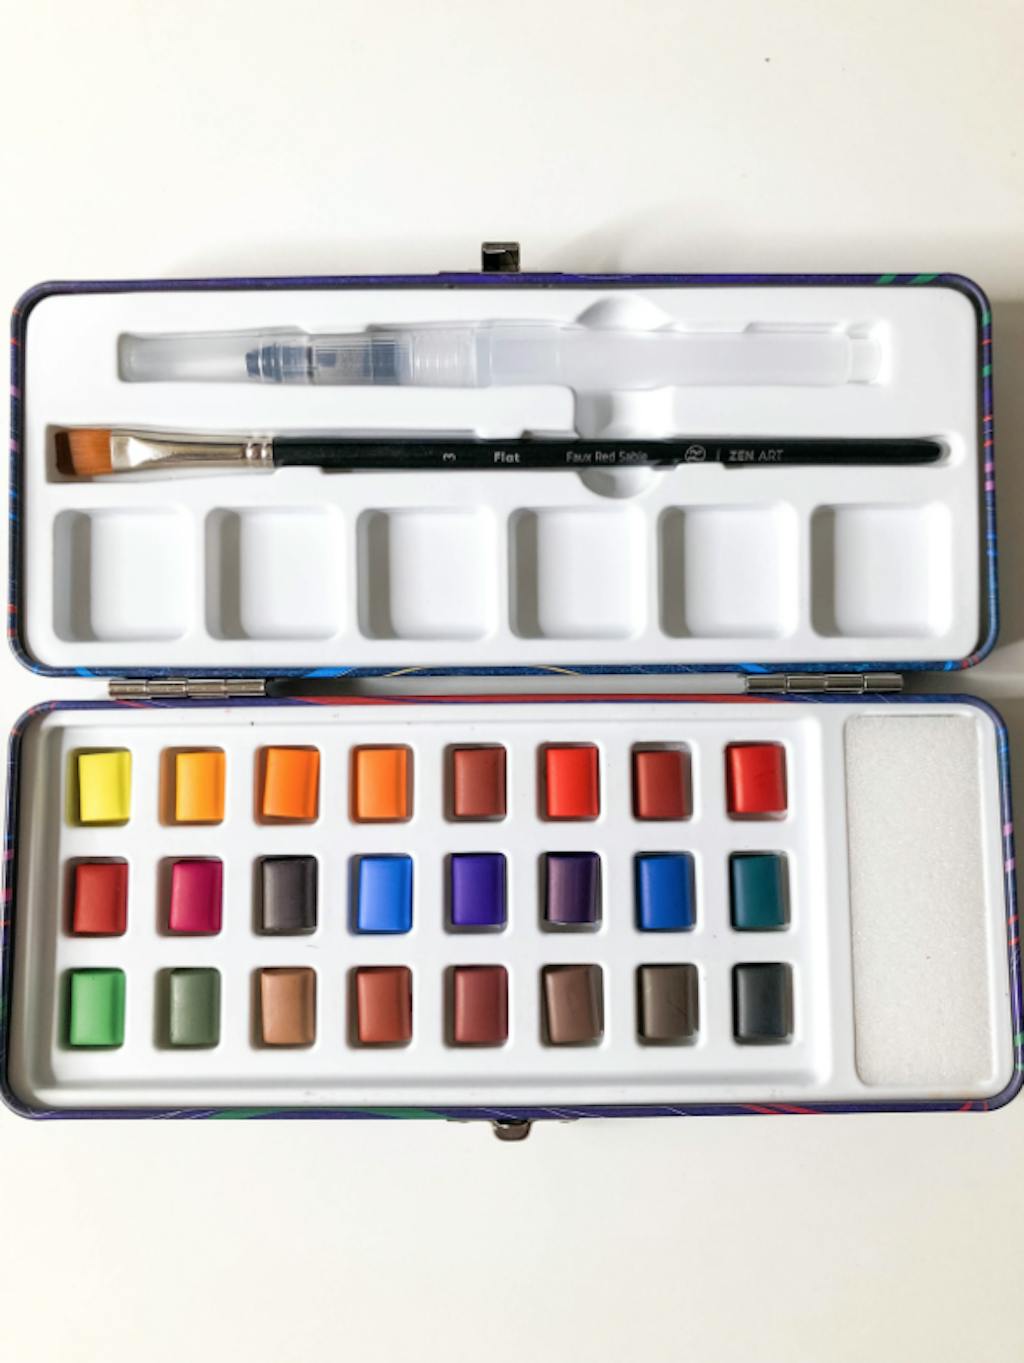  Bright Stripes 24 Watercolor Paint Set With Water Brush Pen,  Premium Watercolors, Sponge, Case And Palette, Perfect Travel Art Kit For  Painting On The Go, Great Creative Gifts : Arts, Crafts